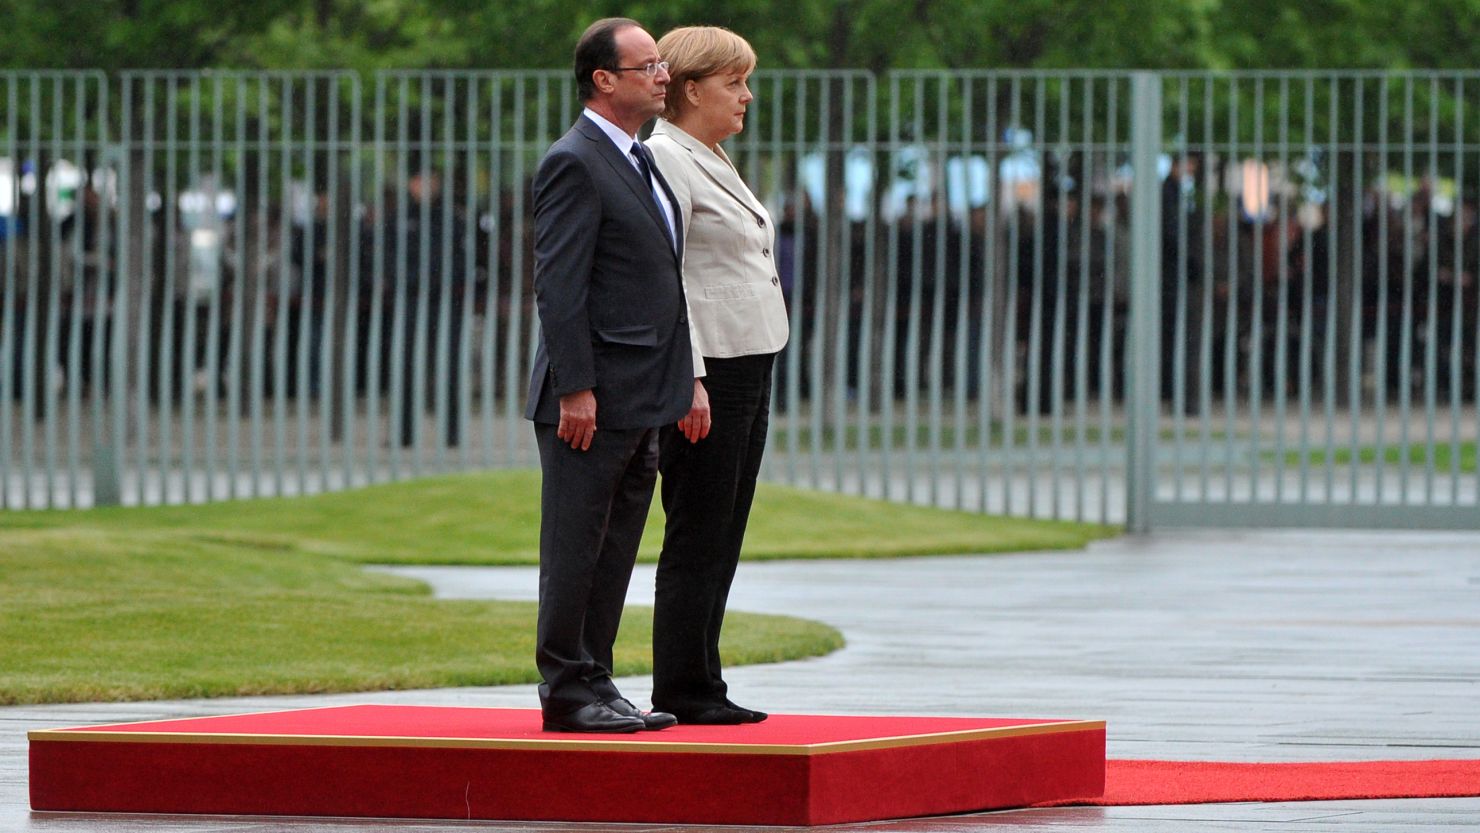 Merkel and Hollande's differing views on how to spur growth is the greatest hurdle to solving the euro crisis, writes Spiro.